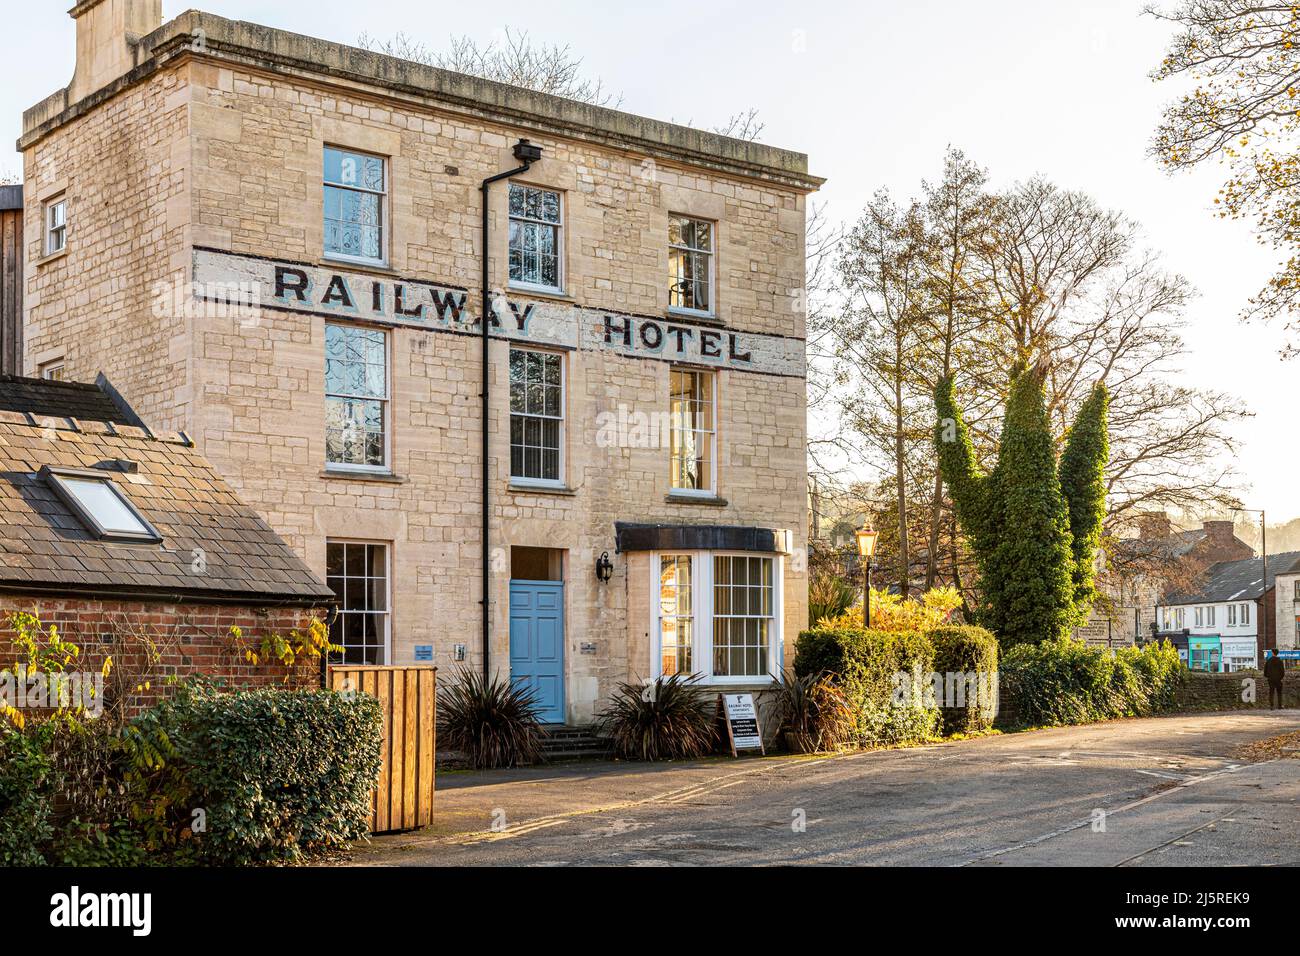 The old Railway Hotel (now converted into luxury appartments) in the small town of Nailsworth in the Stroud Valleys, Gloucestershire, England UK Stock Photo